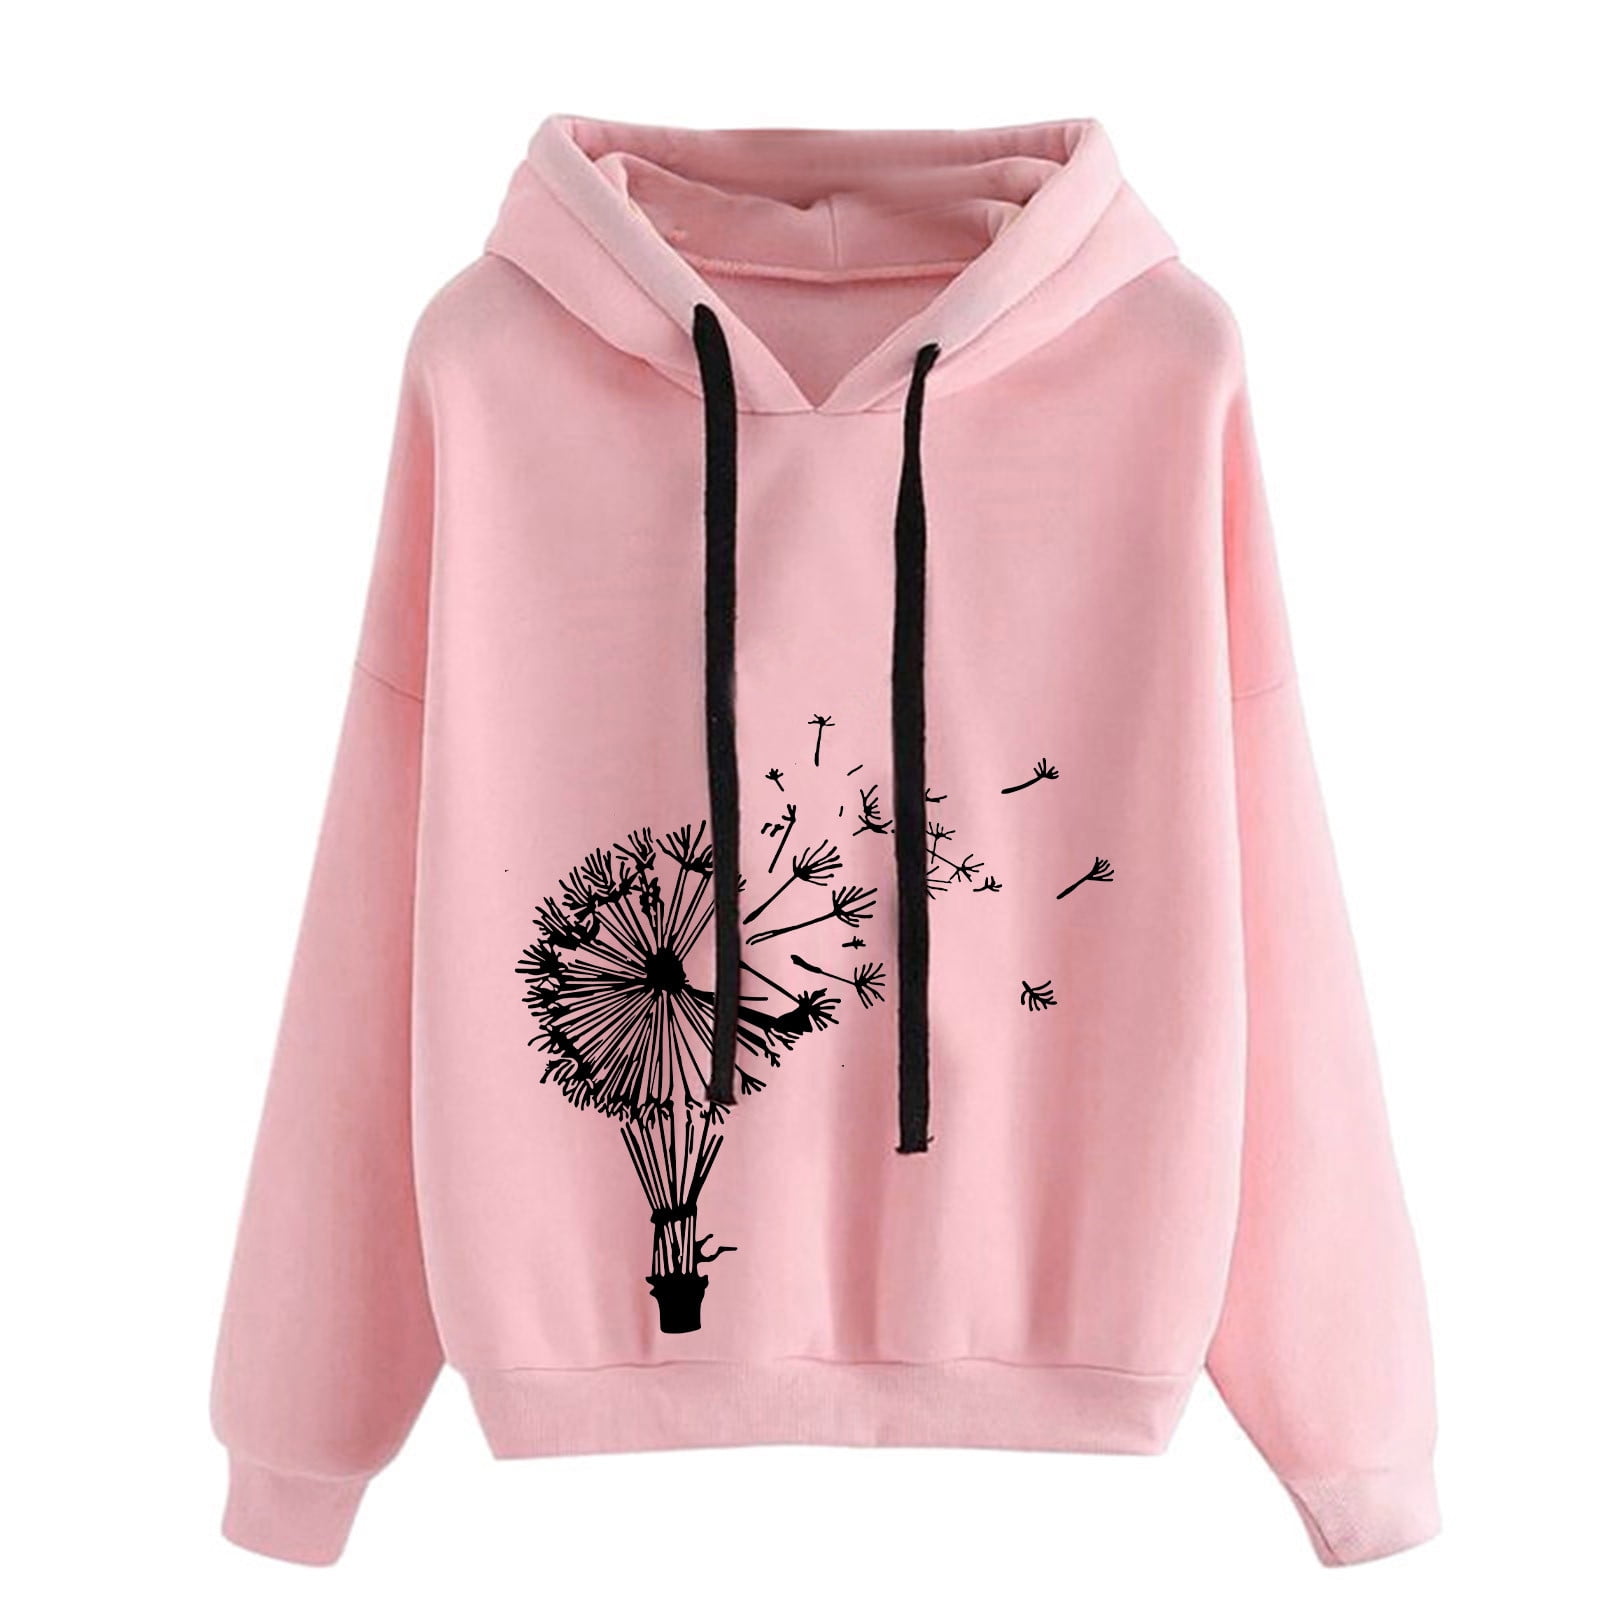 Fashion Deals Sale! RQYYD Dandelion Print Hooded Sweatshirts Women Long  Sleeve Crew Neck Hoodie Tunic Tops for Leggings Cute Graphic Fall Comfy